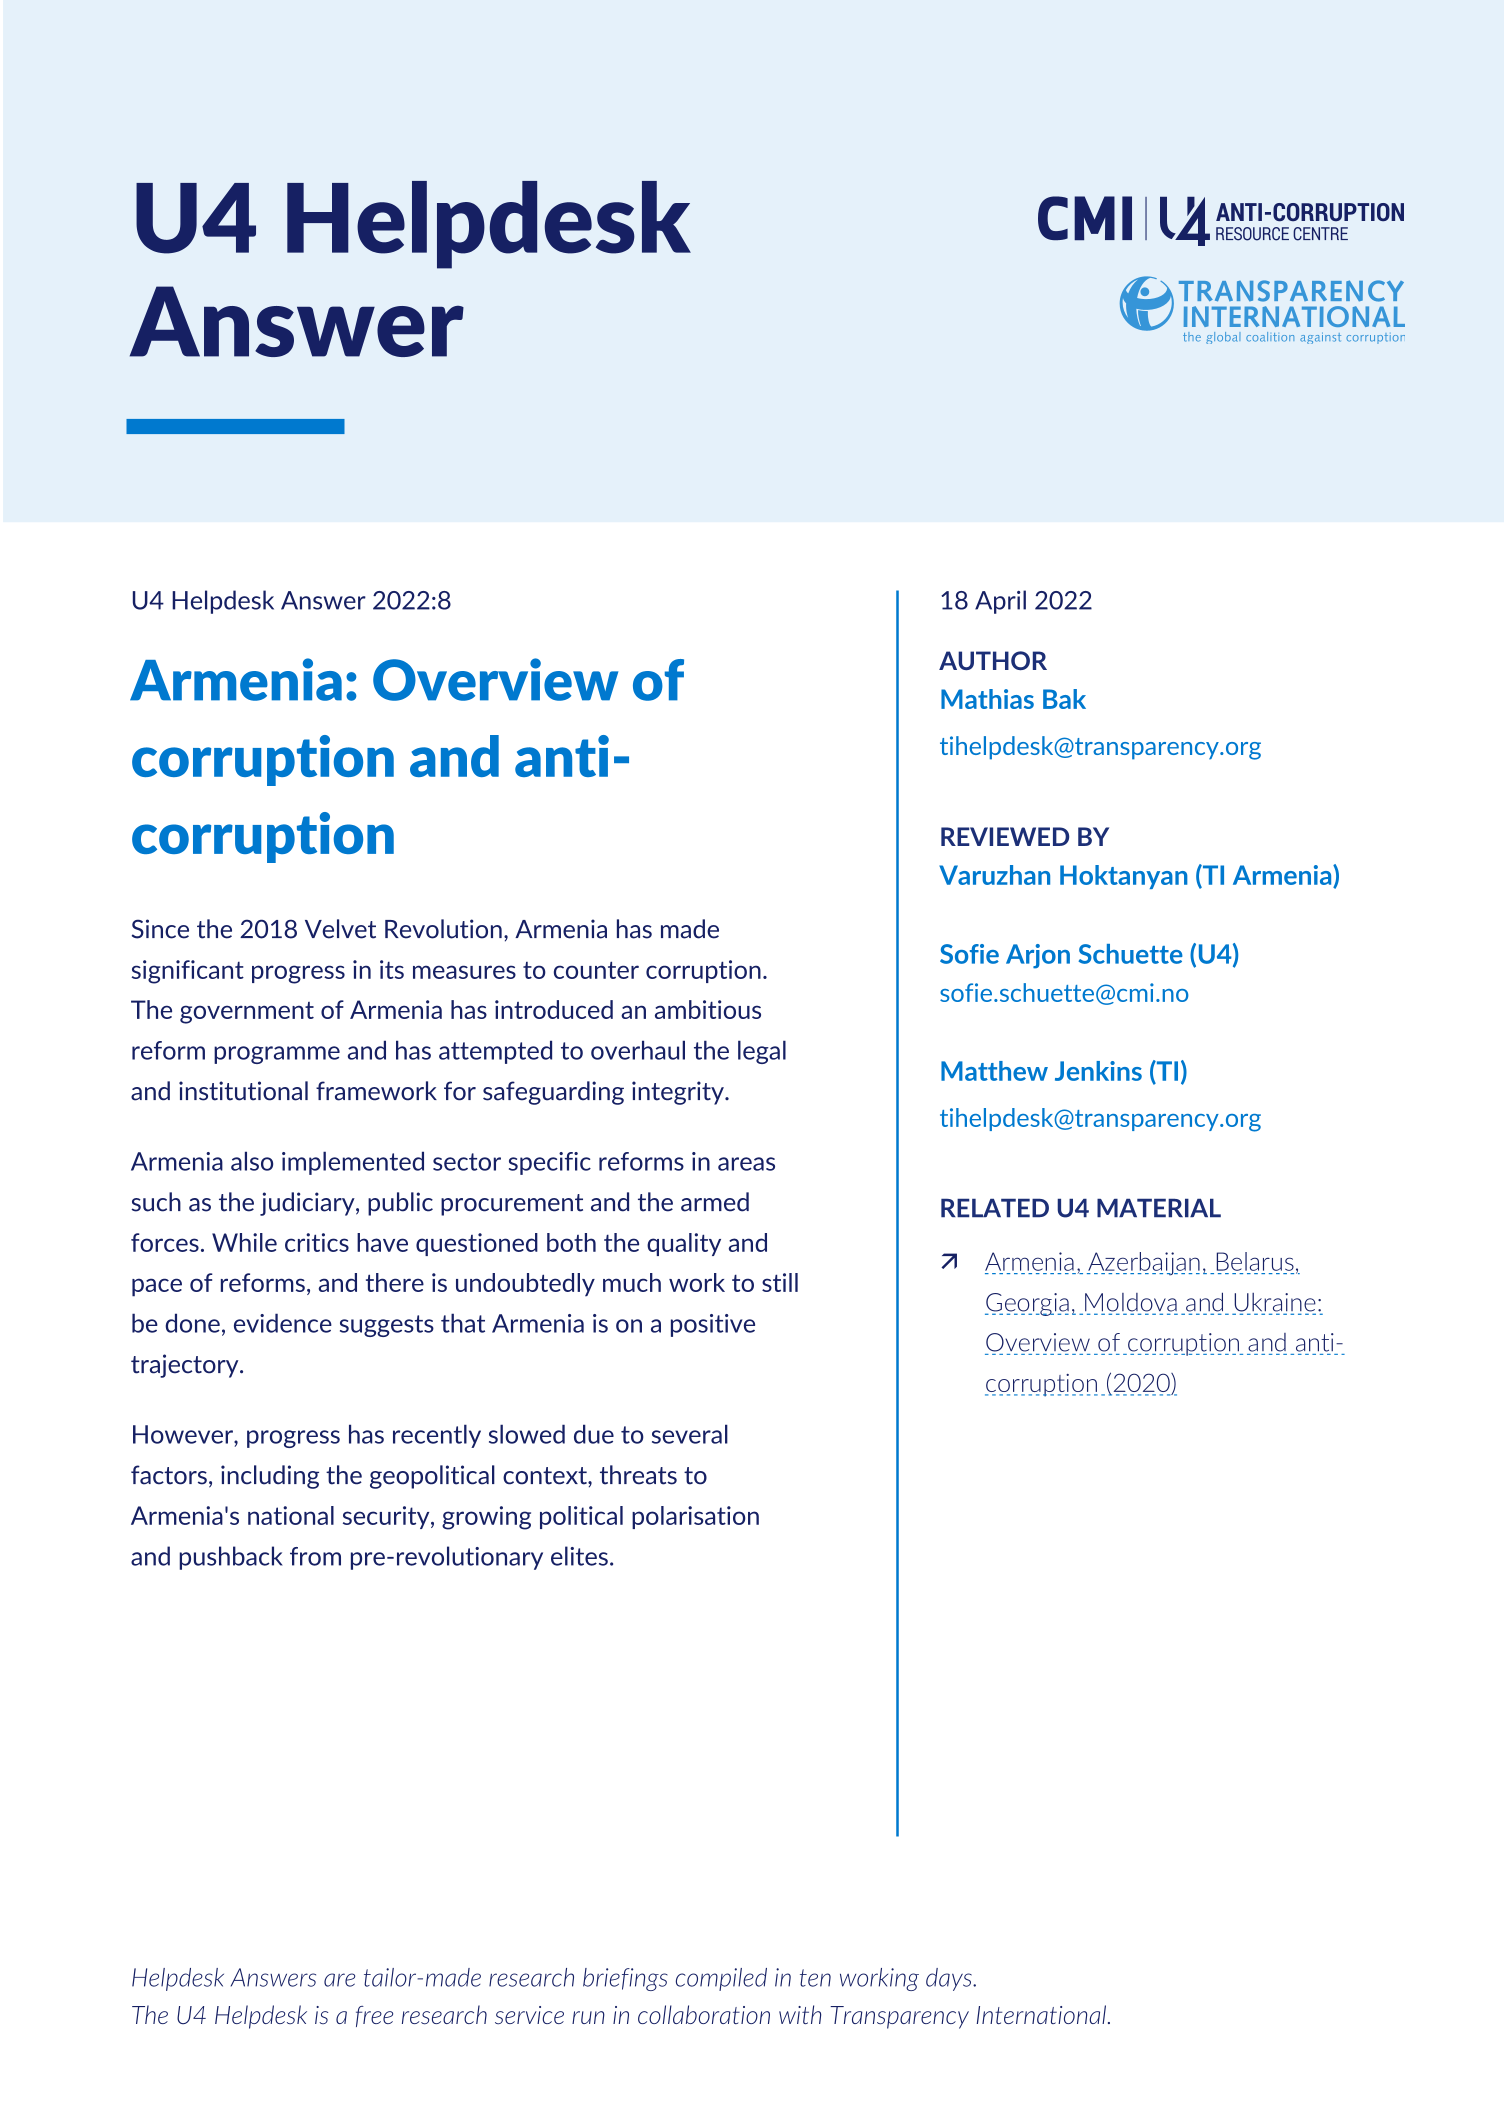 Armenia: Overview of corruption and anti-corruption